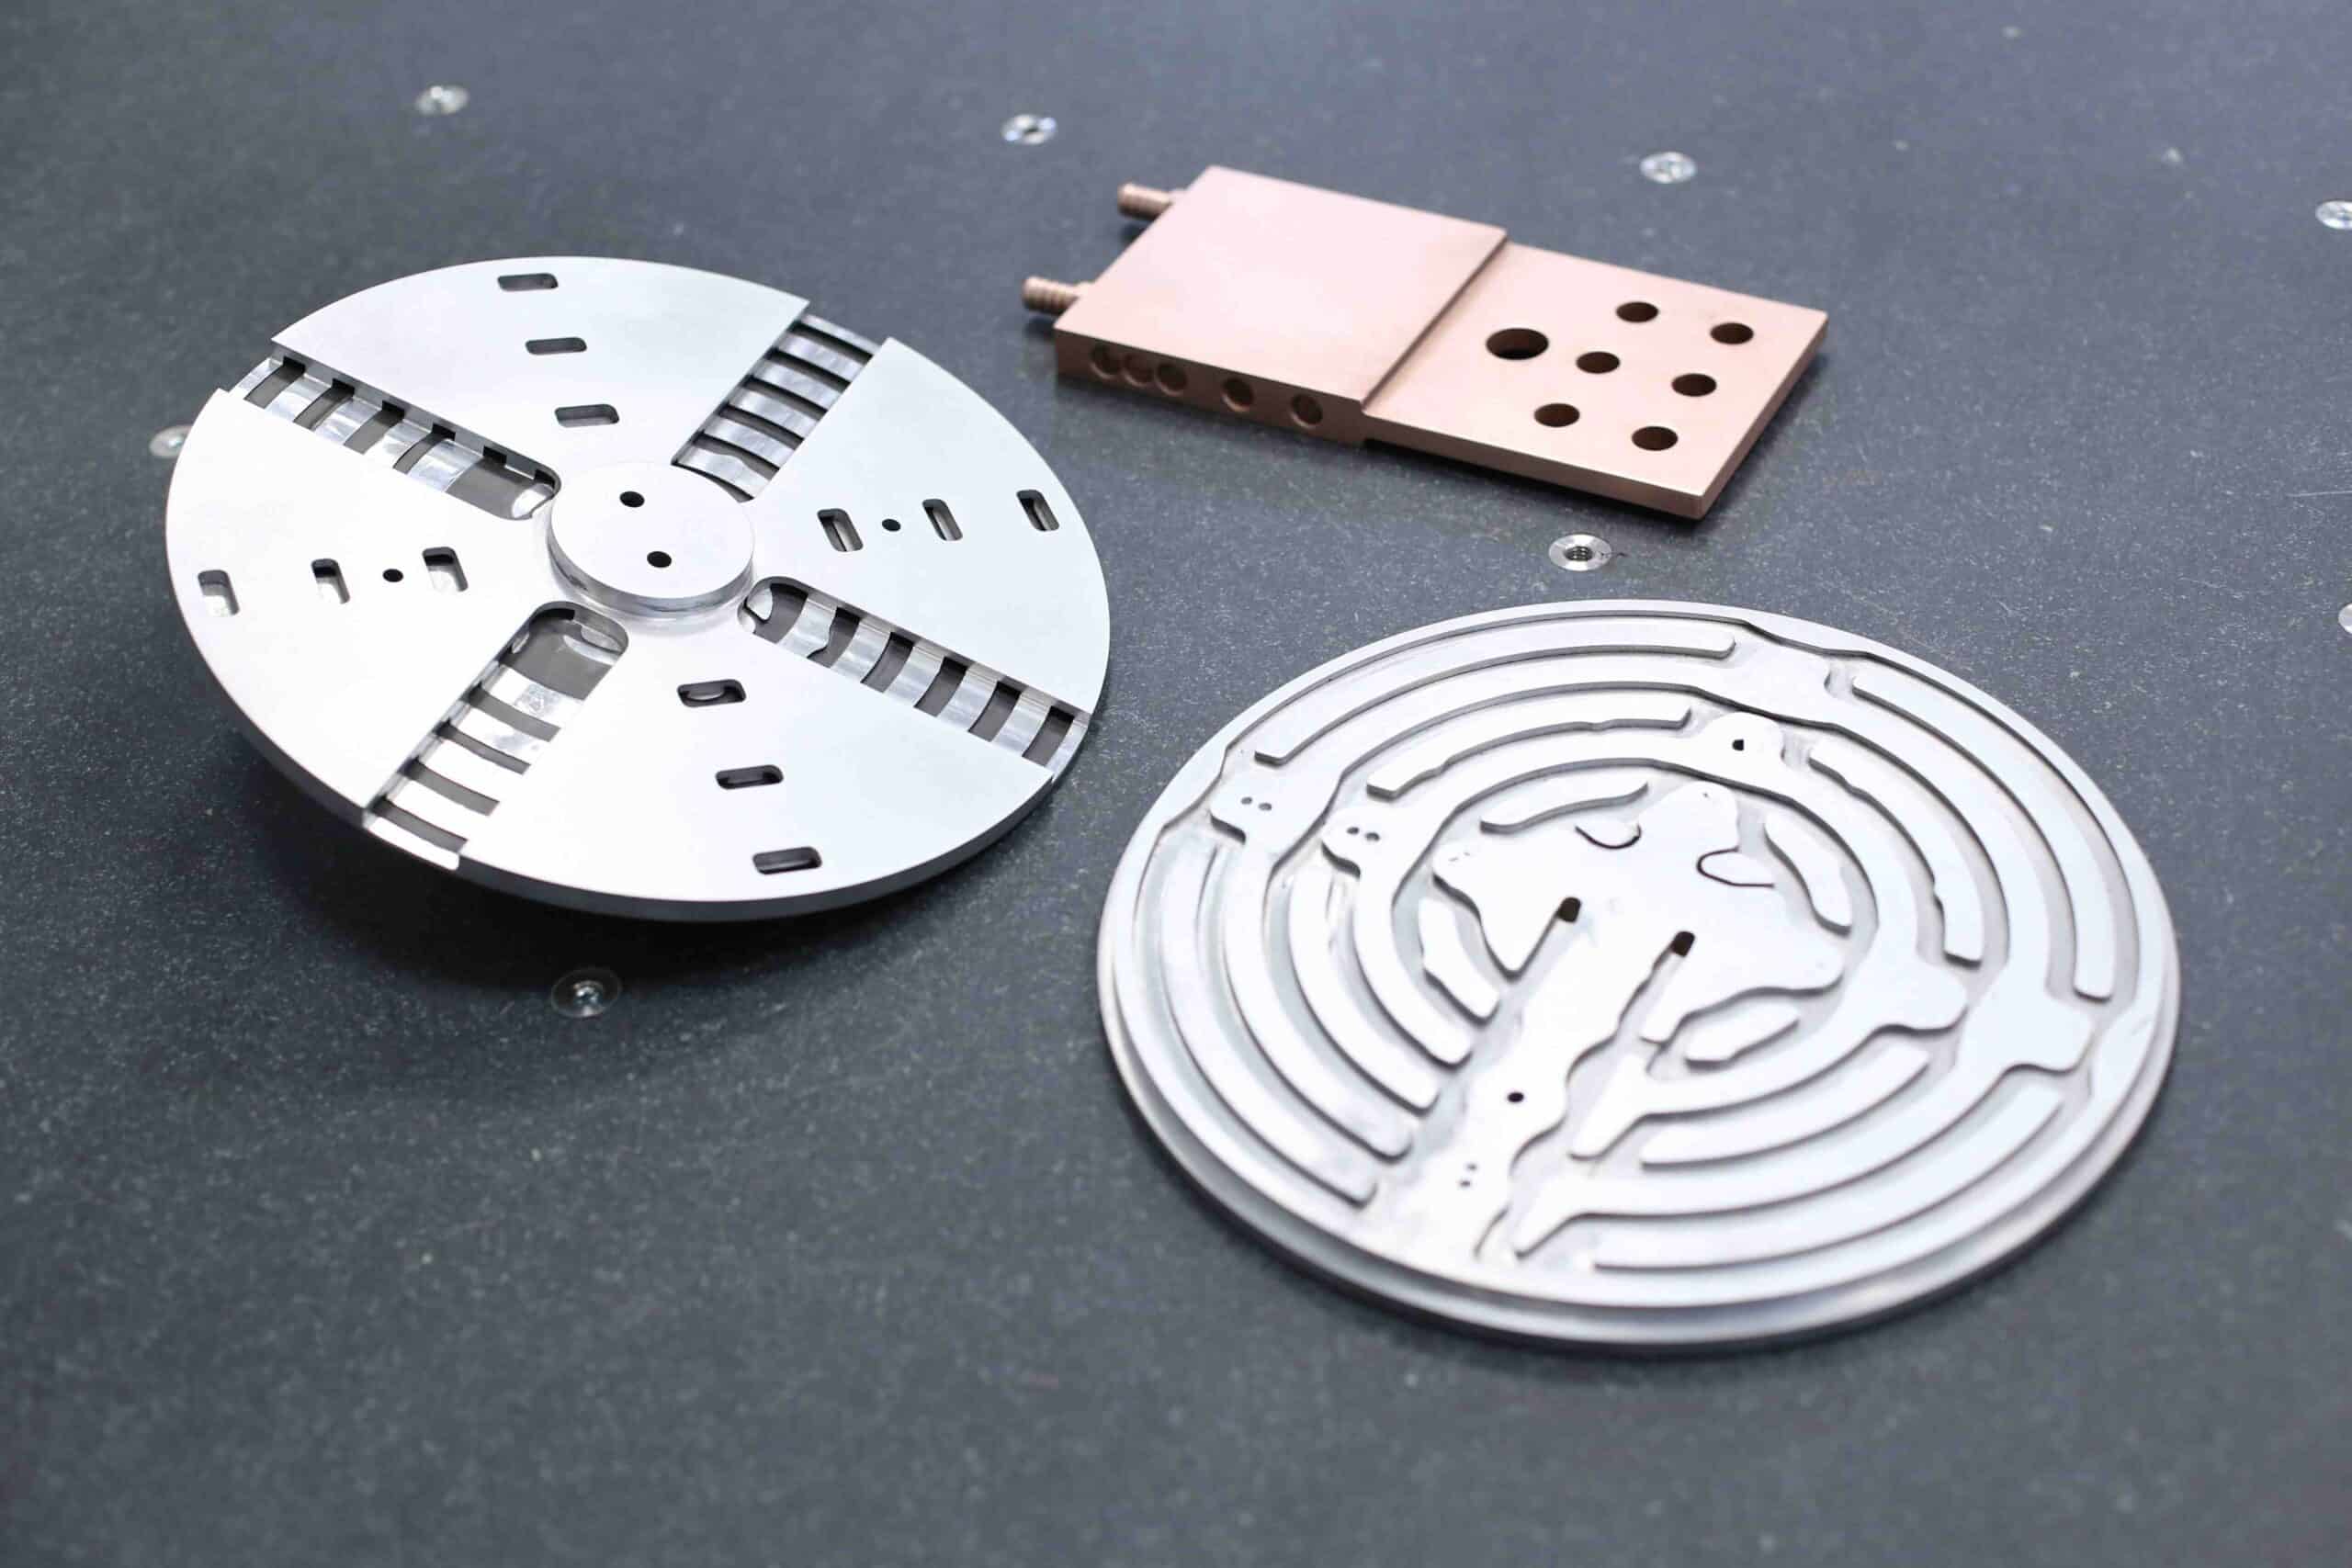 Which of the following characteristics accurately describe passive heat sinks?